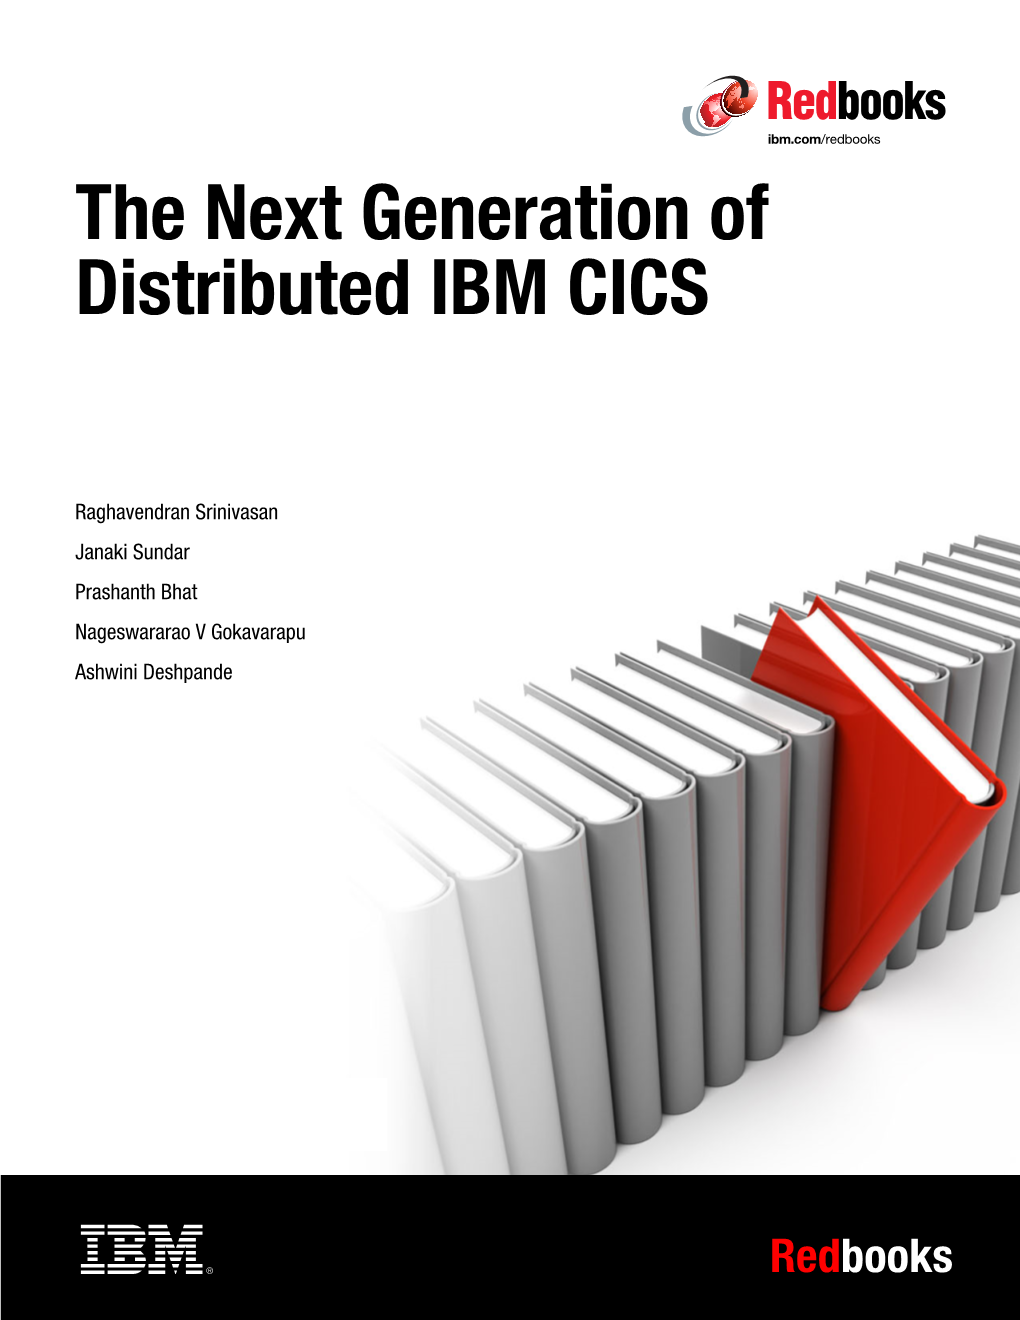 The Next Generation of Distributed IBM CICS